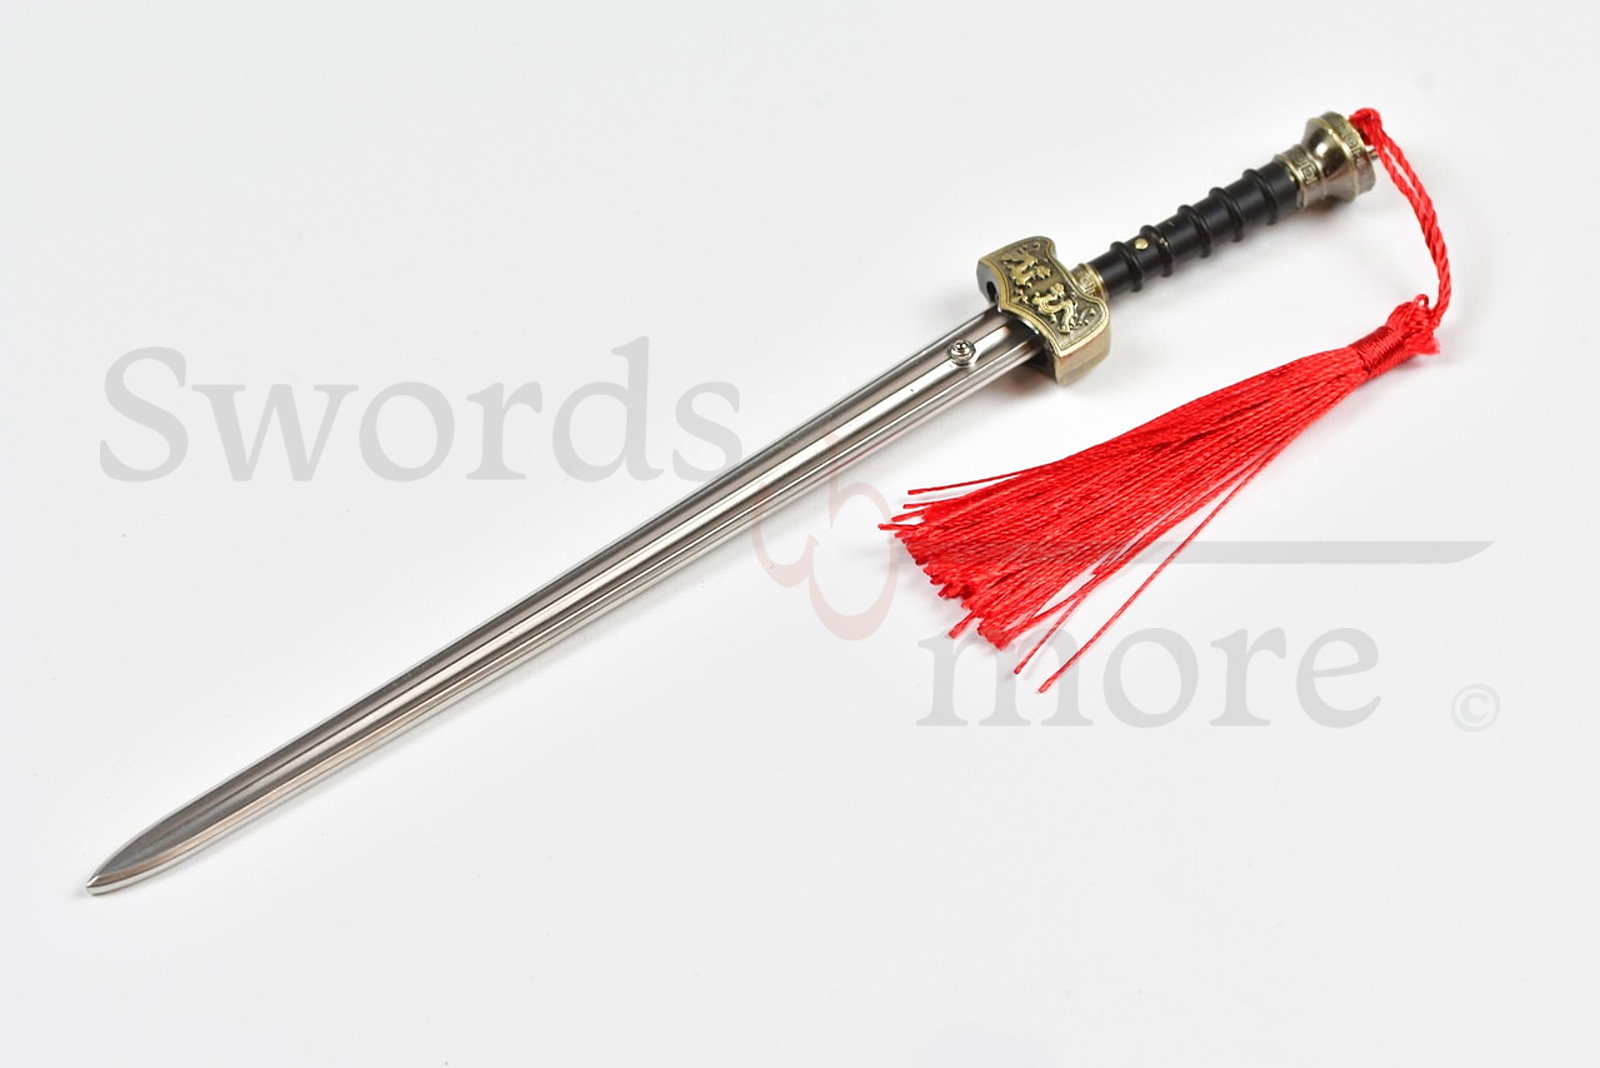 Tai Chi Sword - Kung Fu Jian Sword Letter Opener with Sheath and Stand 